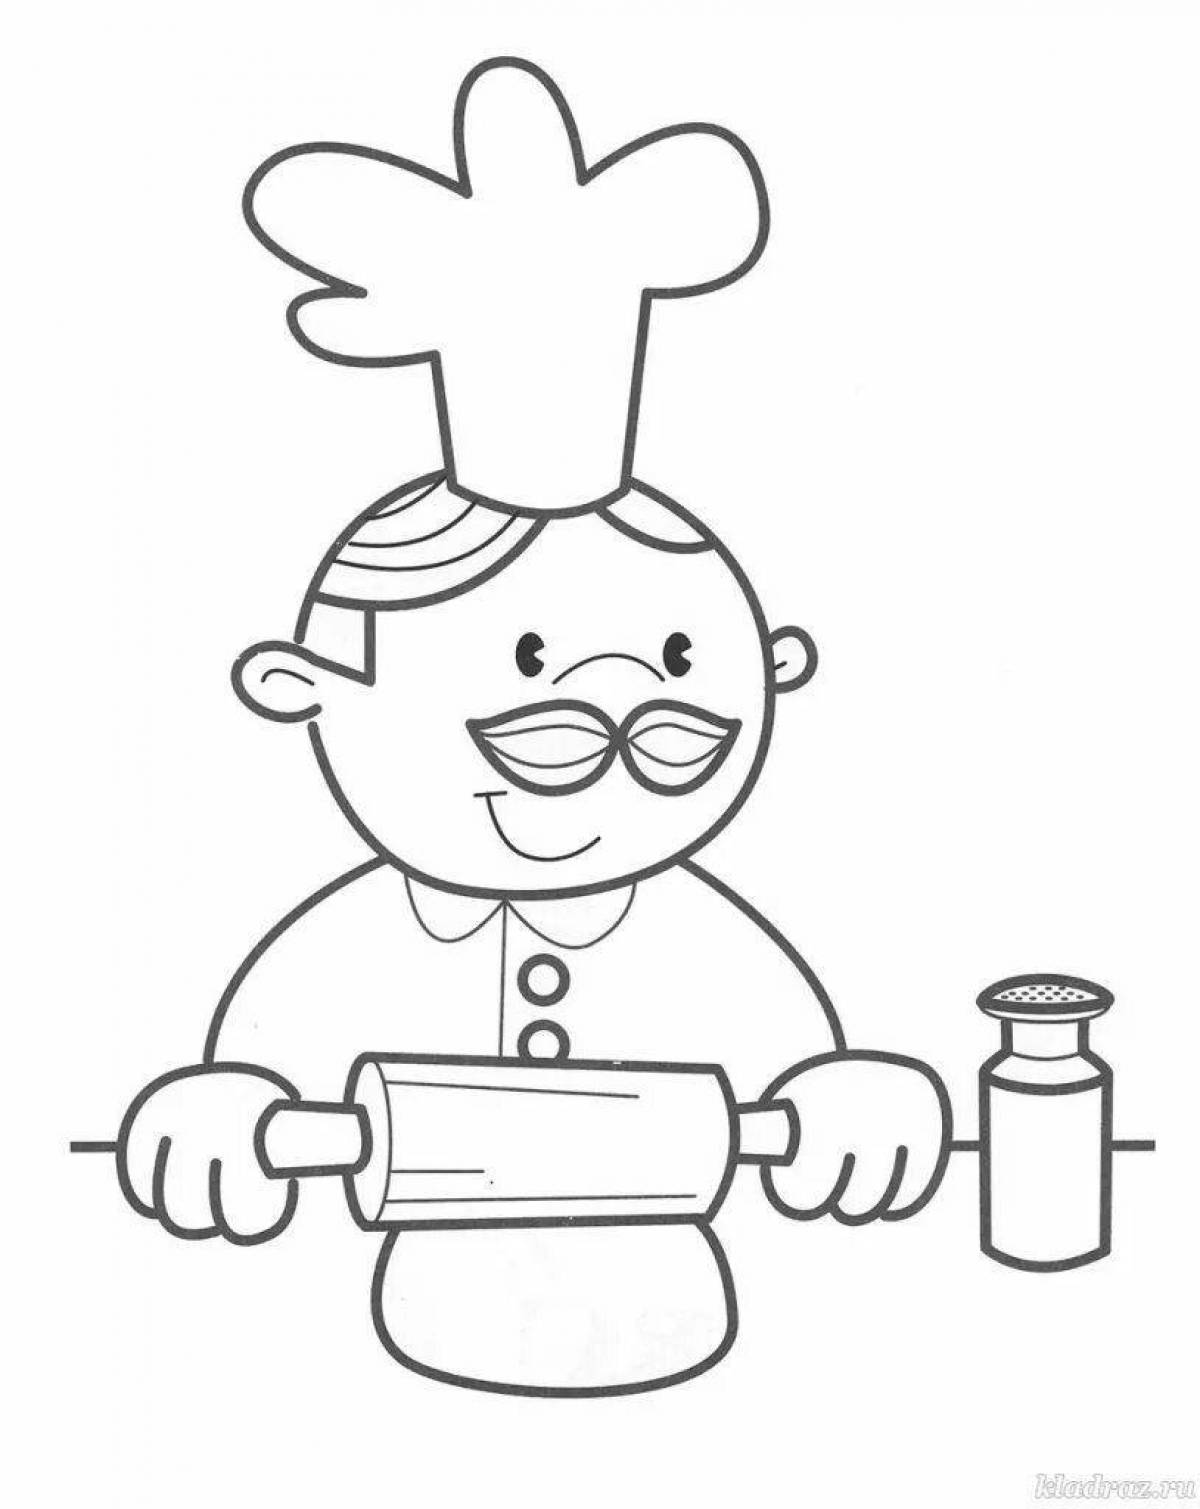 Cute yeast coloring page